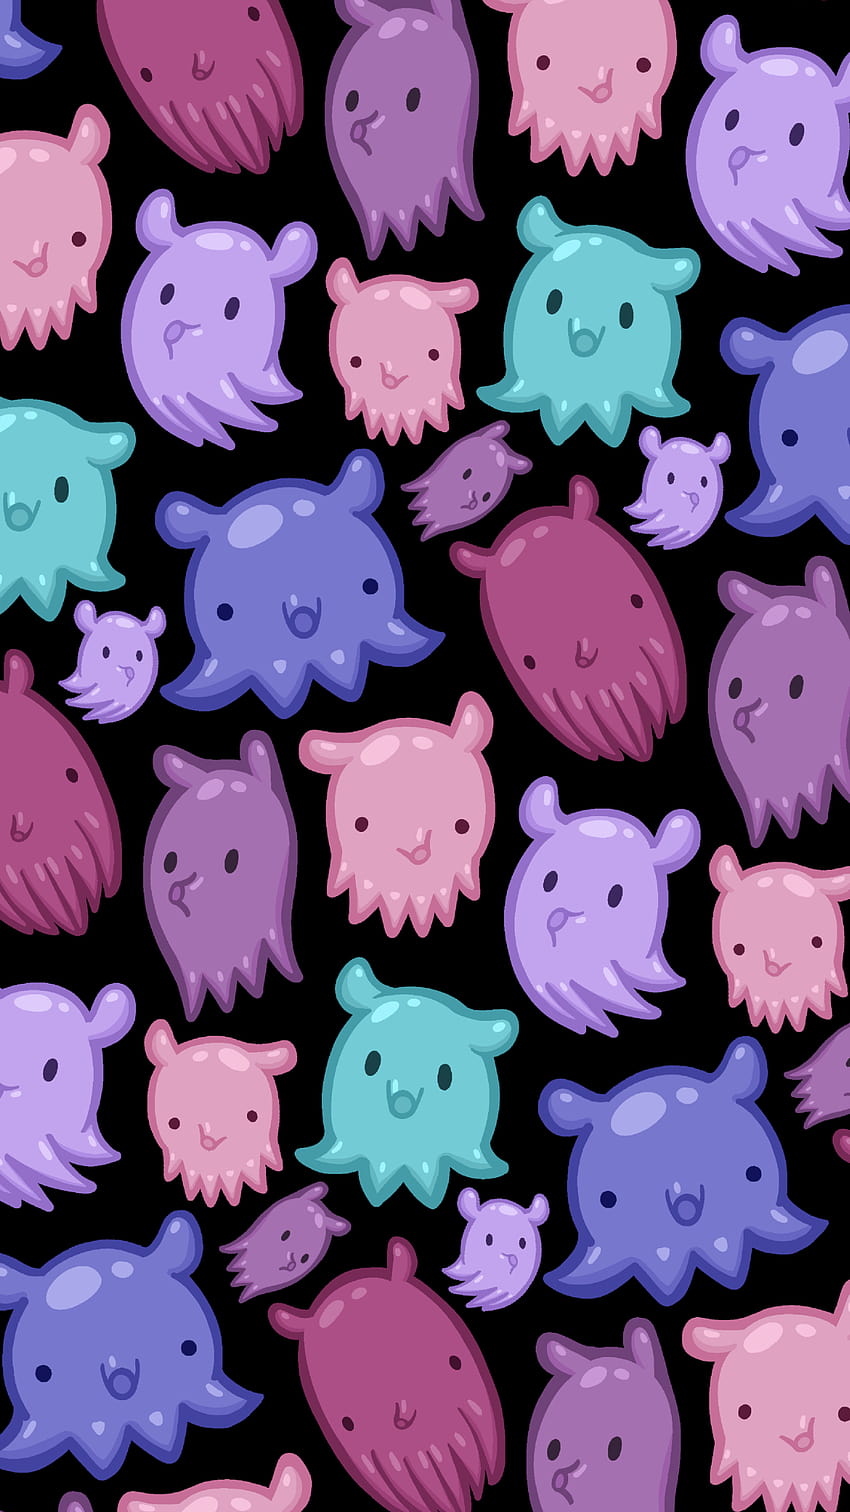 Octopus Phone posted by Ethan Johnson, cute octopus HD phone wallpaper